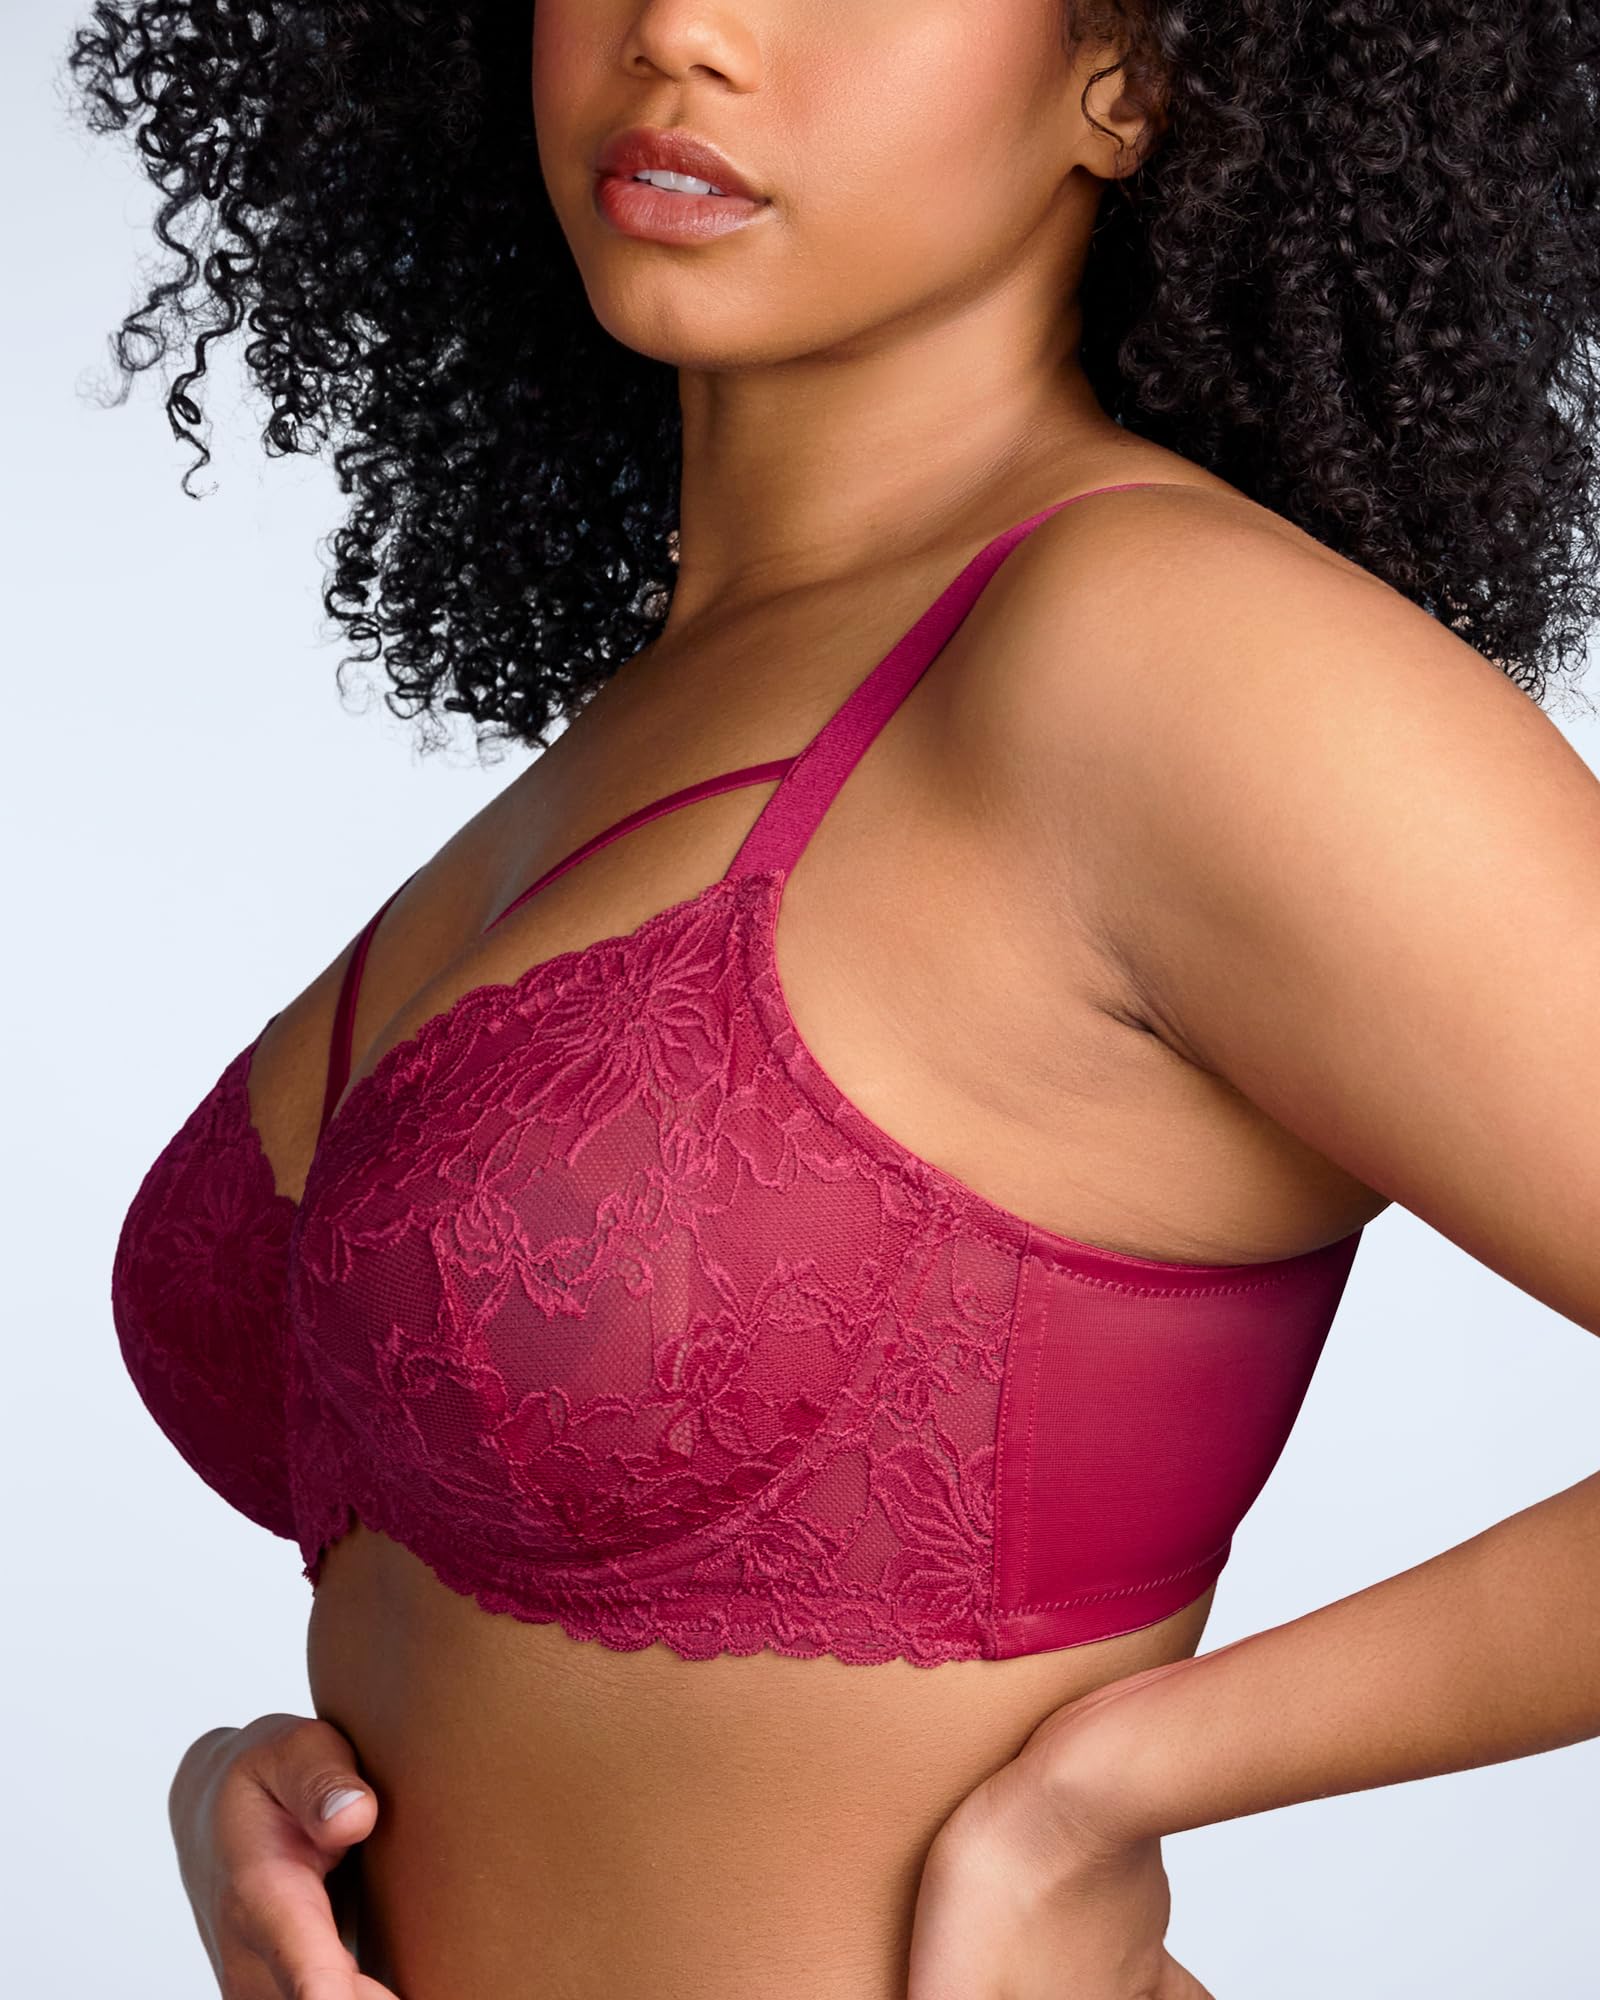 HSIA Minimizer Bra for Women,Unlined Non Padded Lace Sexy Plus